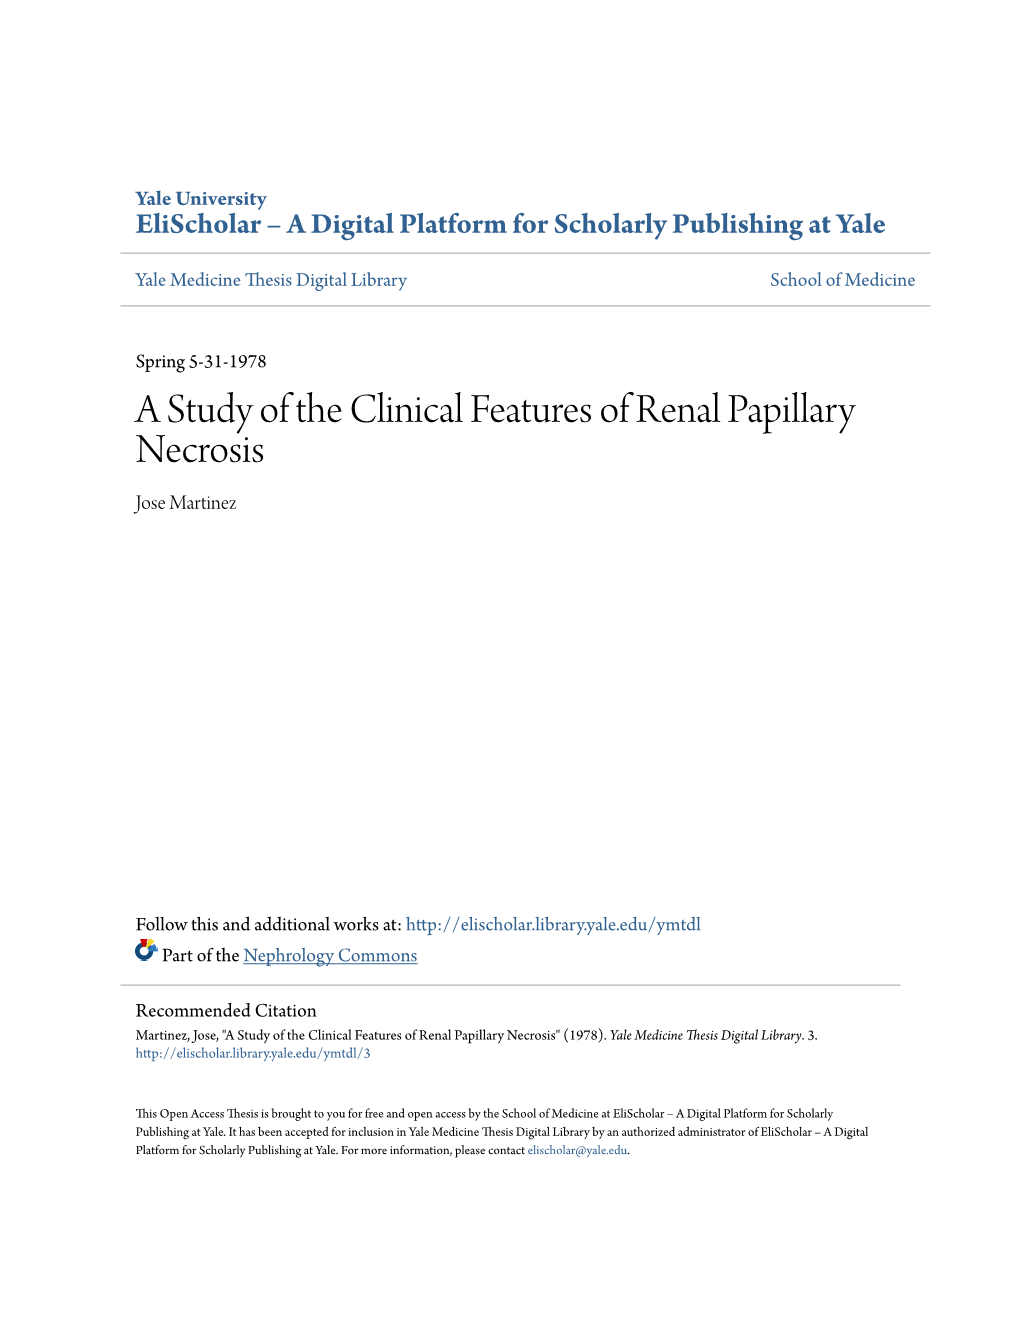 A Study of the Clinical Features of Renal Papillary Necrosis Jose Martinez